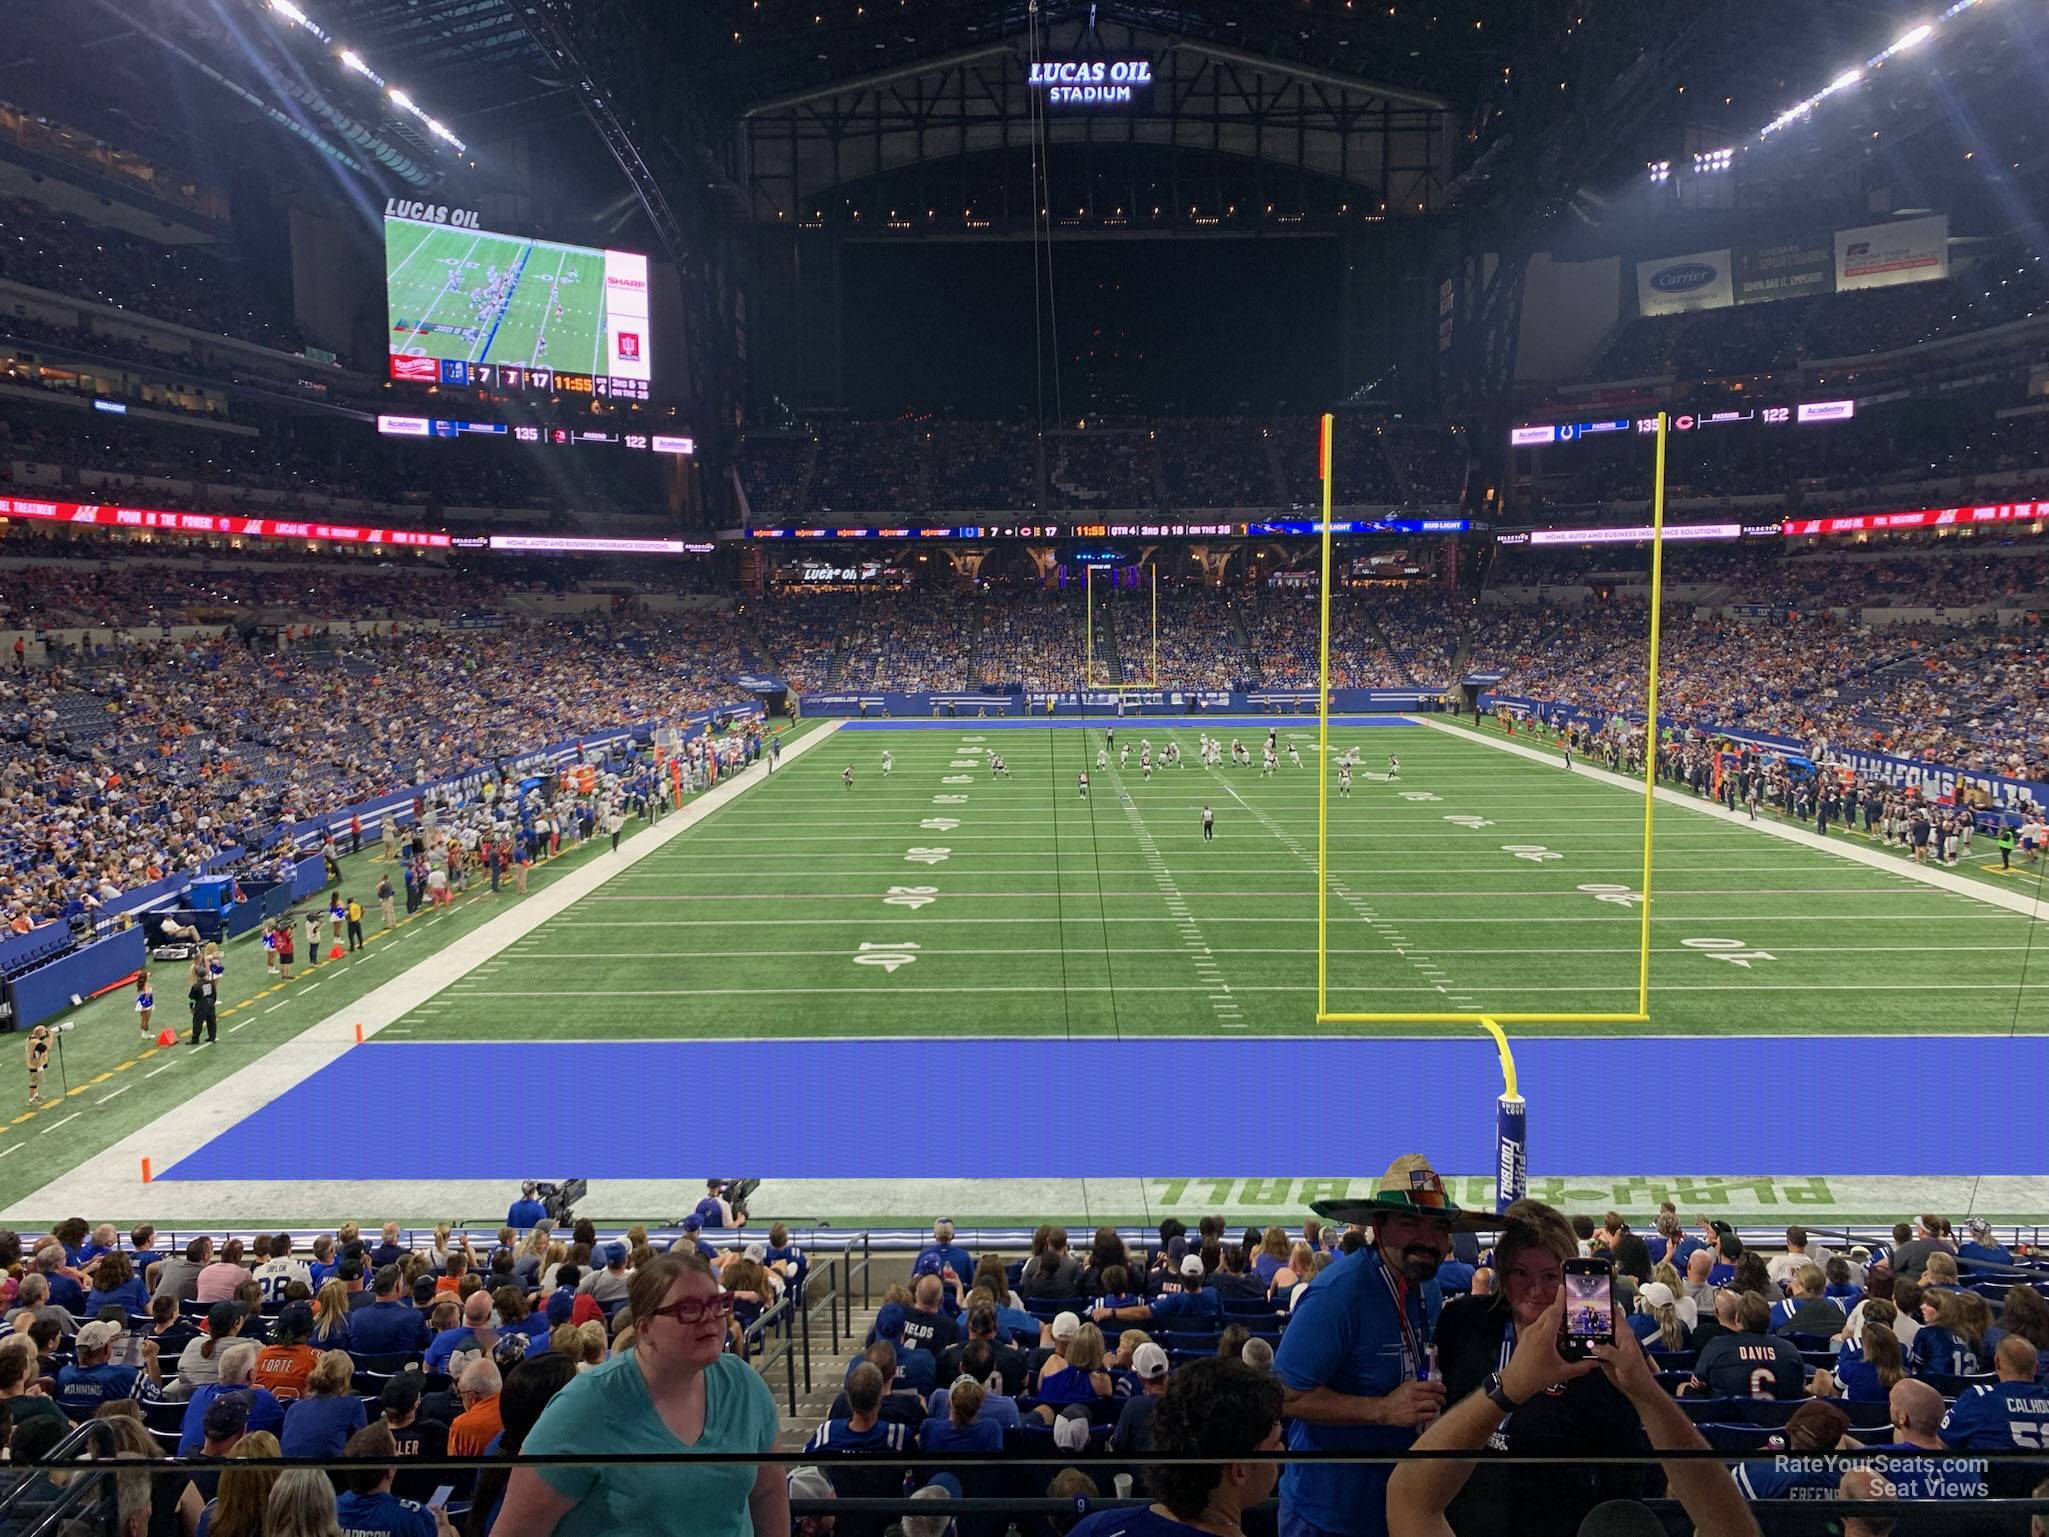 section 228, row 1 seat view  for football - lucas oil stadium